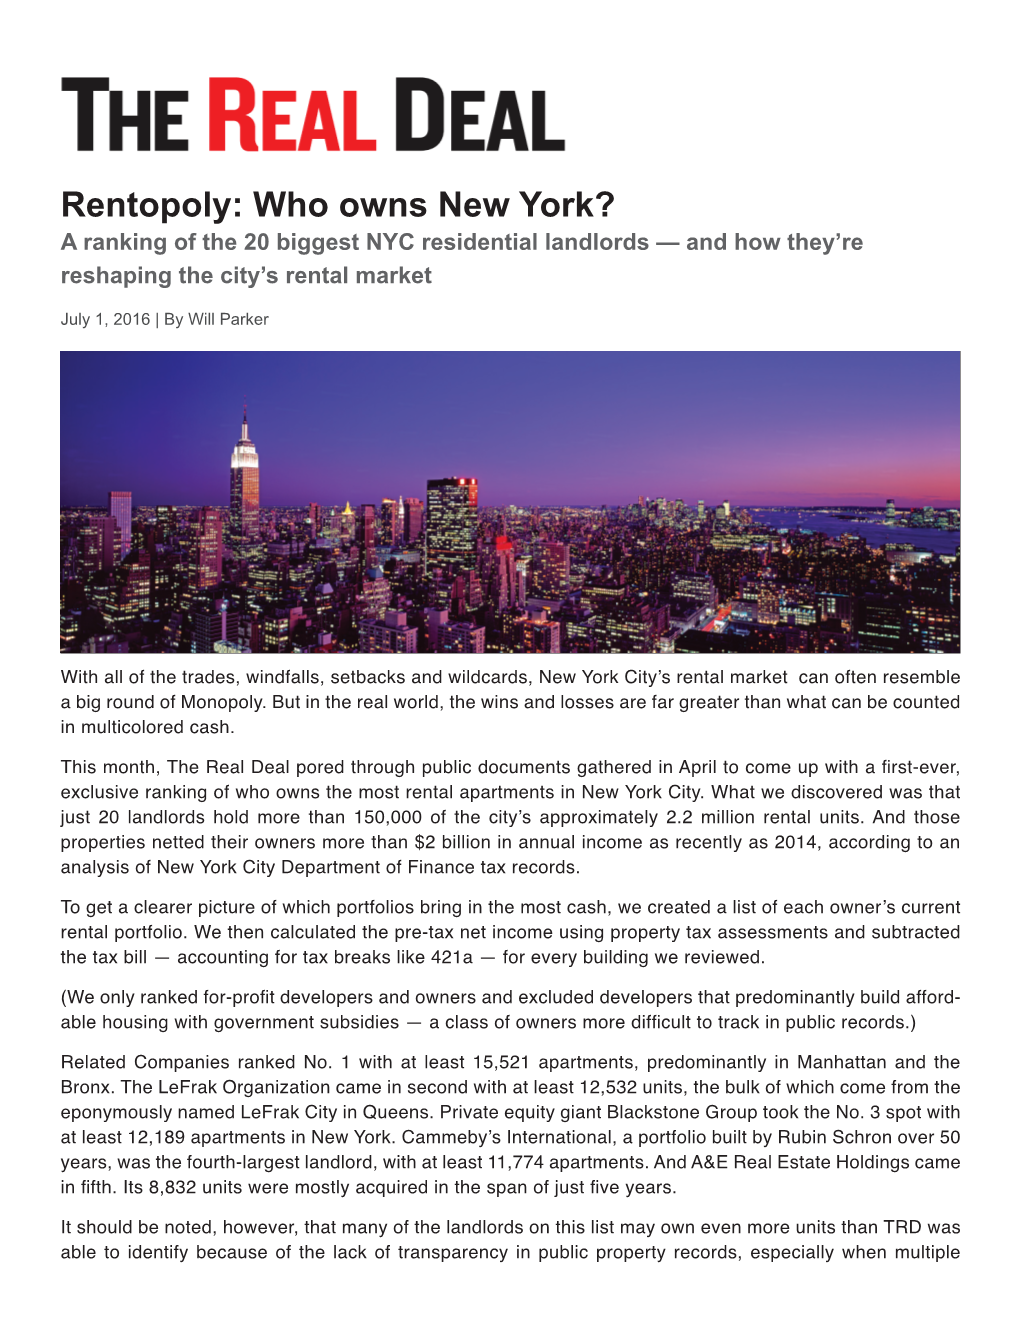 Rentopoly: Who Owns New York? a Ranking of the 20 Biggest NYC Residential Landlords — and How They’Re Reshaping the City’S Rental Market